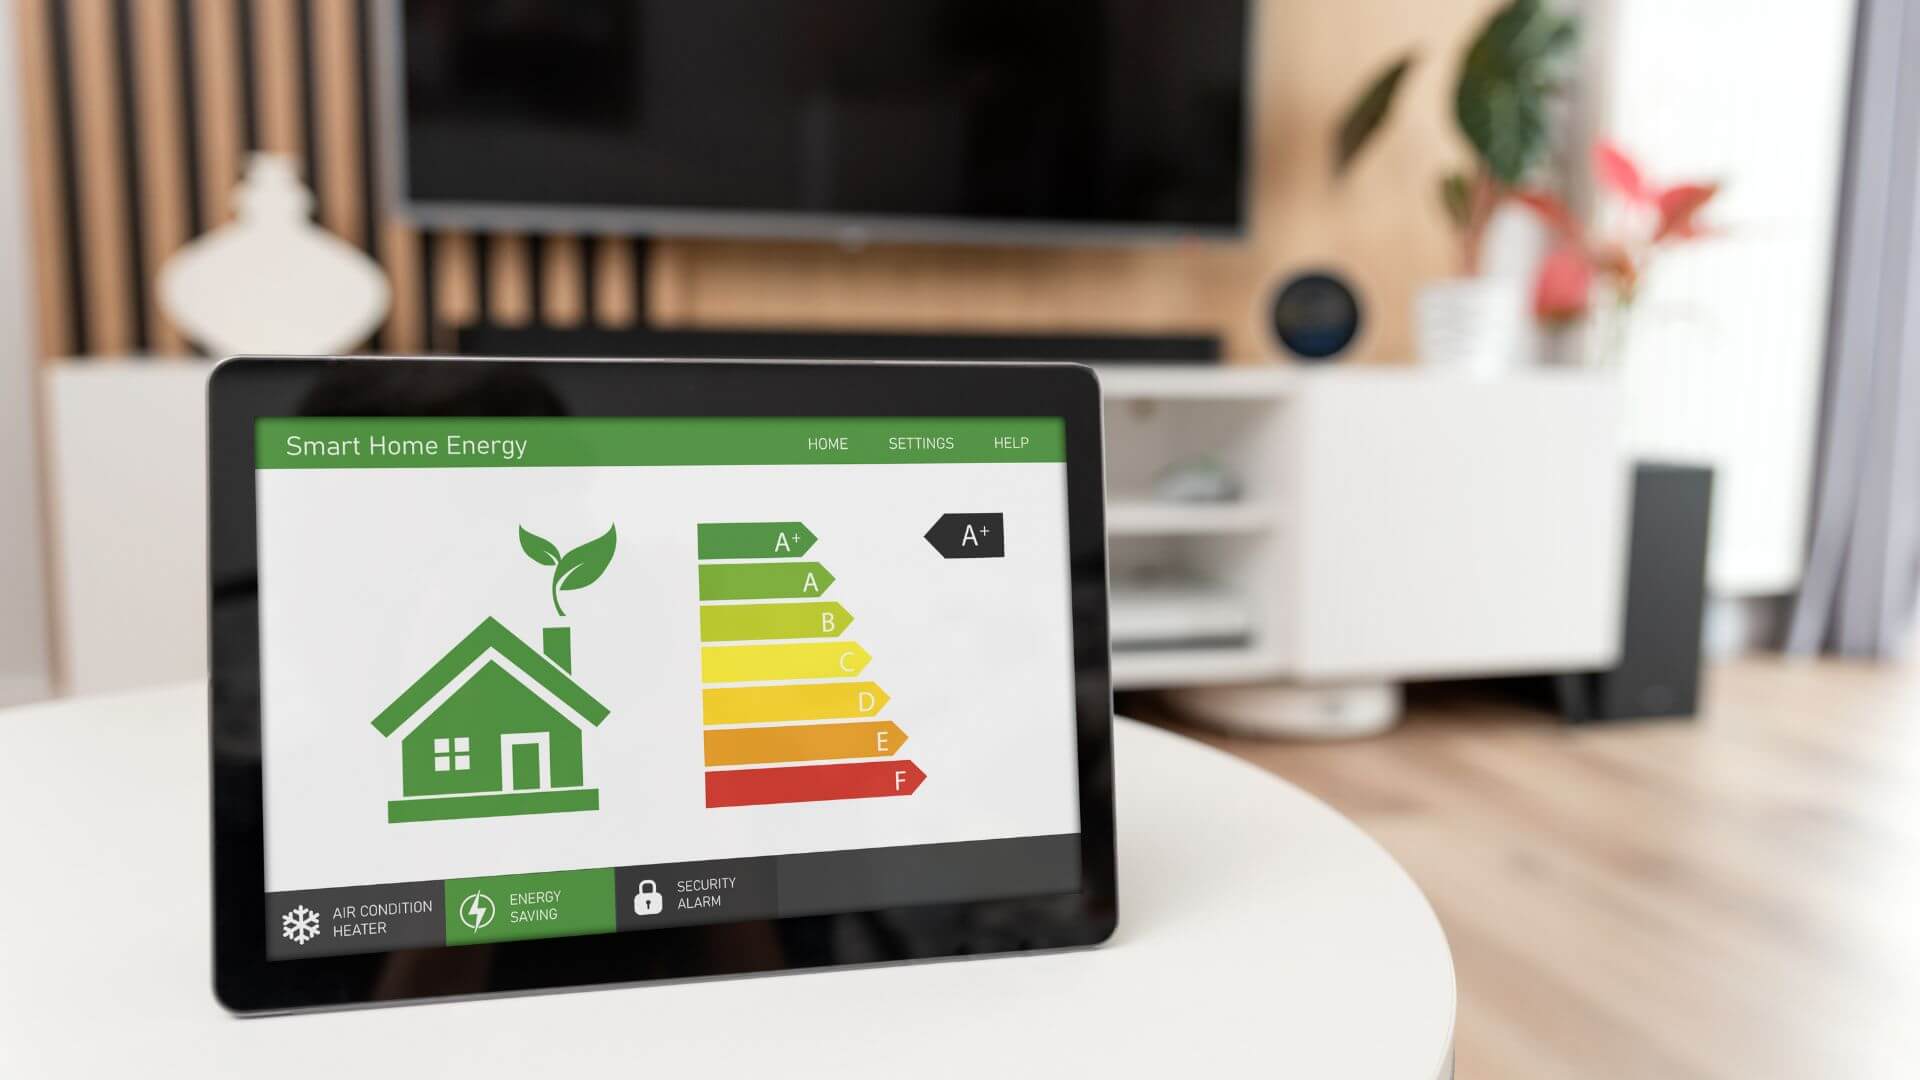 A smart home energy monitor displayed on a tablet, showing an energy efficiency rating chart with a house icon and various energy classes from A+ to F, placed on a living room table with a TV and indoor plants in the background, emphasising a modern, energy-conscious home interior.